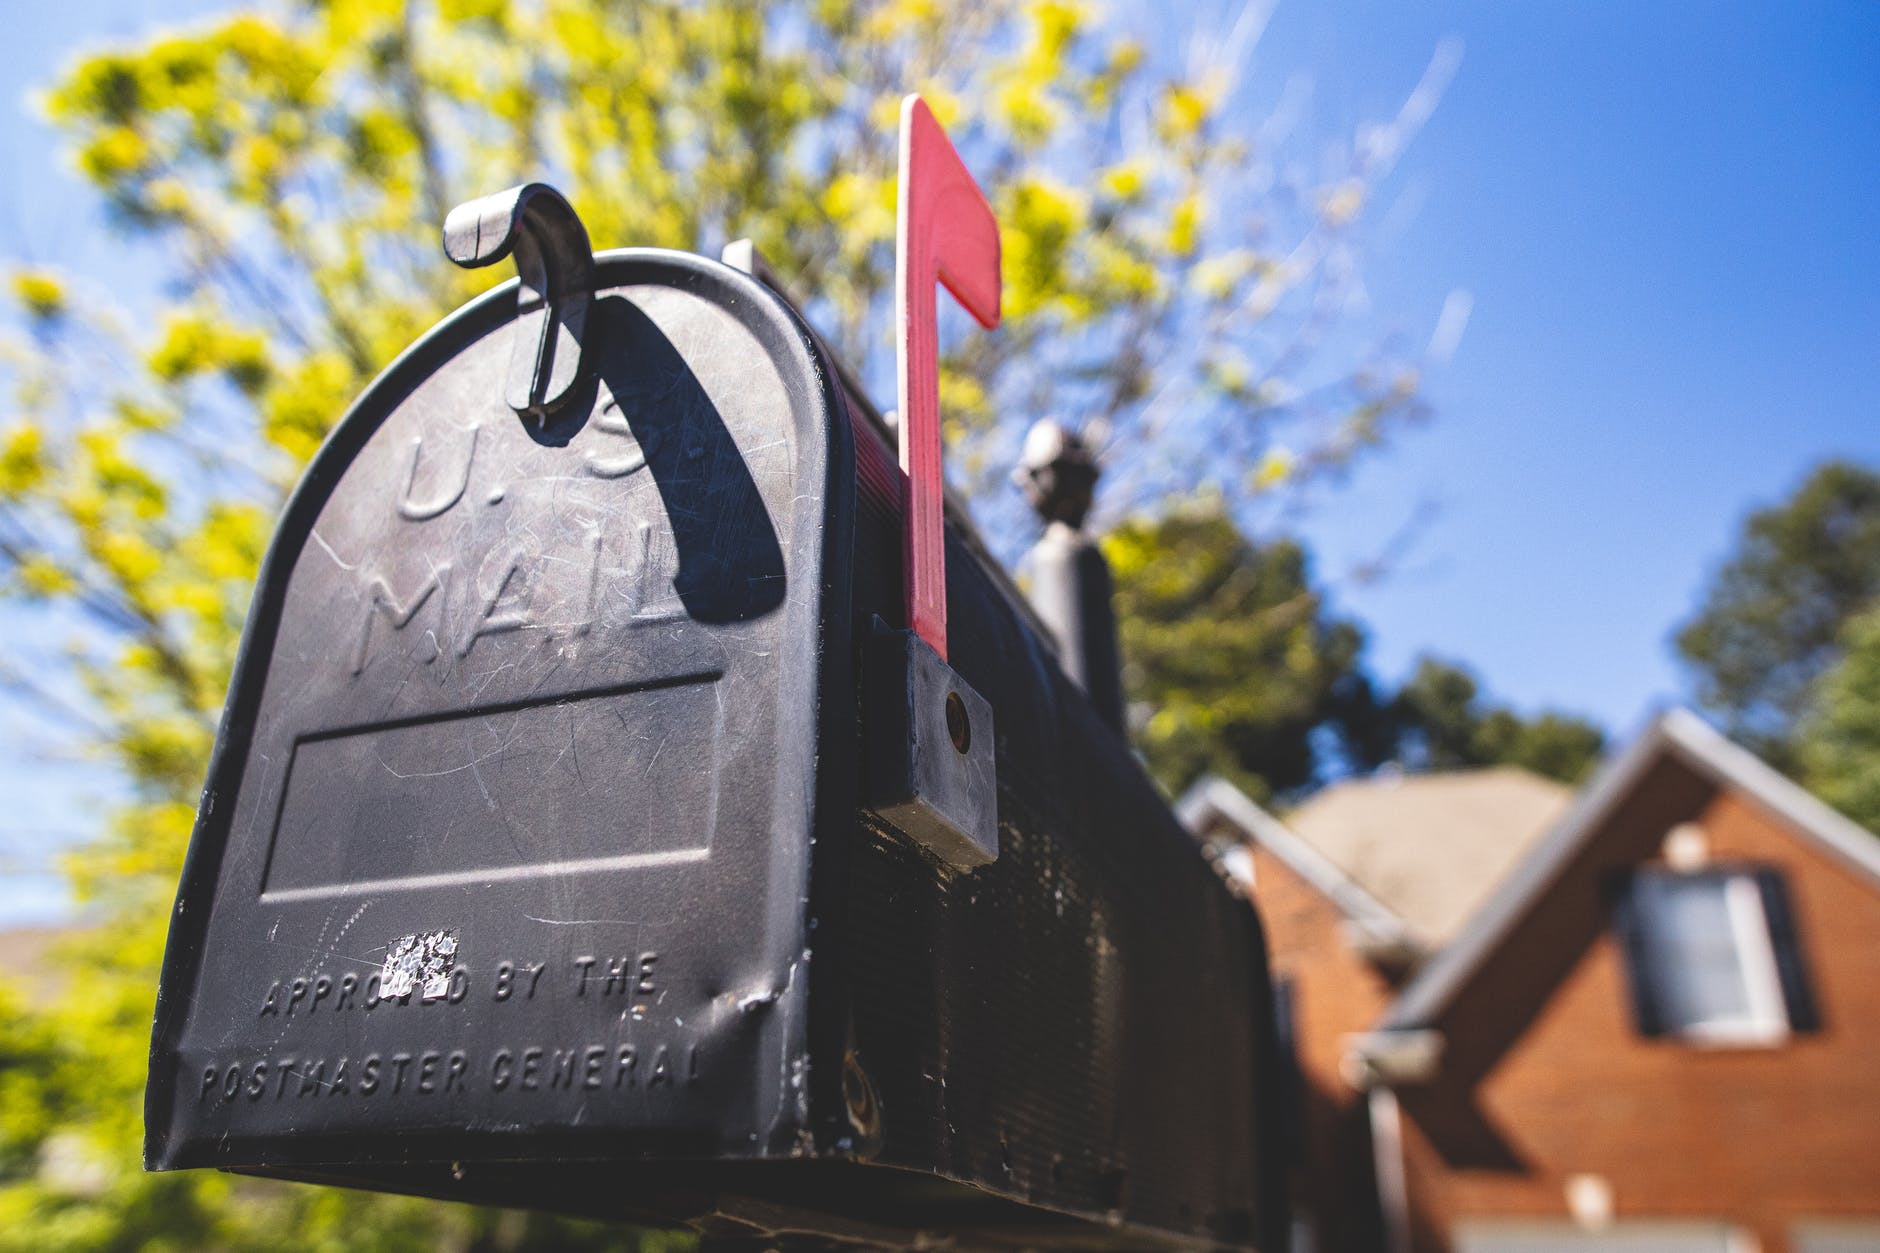 Benefits of Direct Mail Advertising